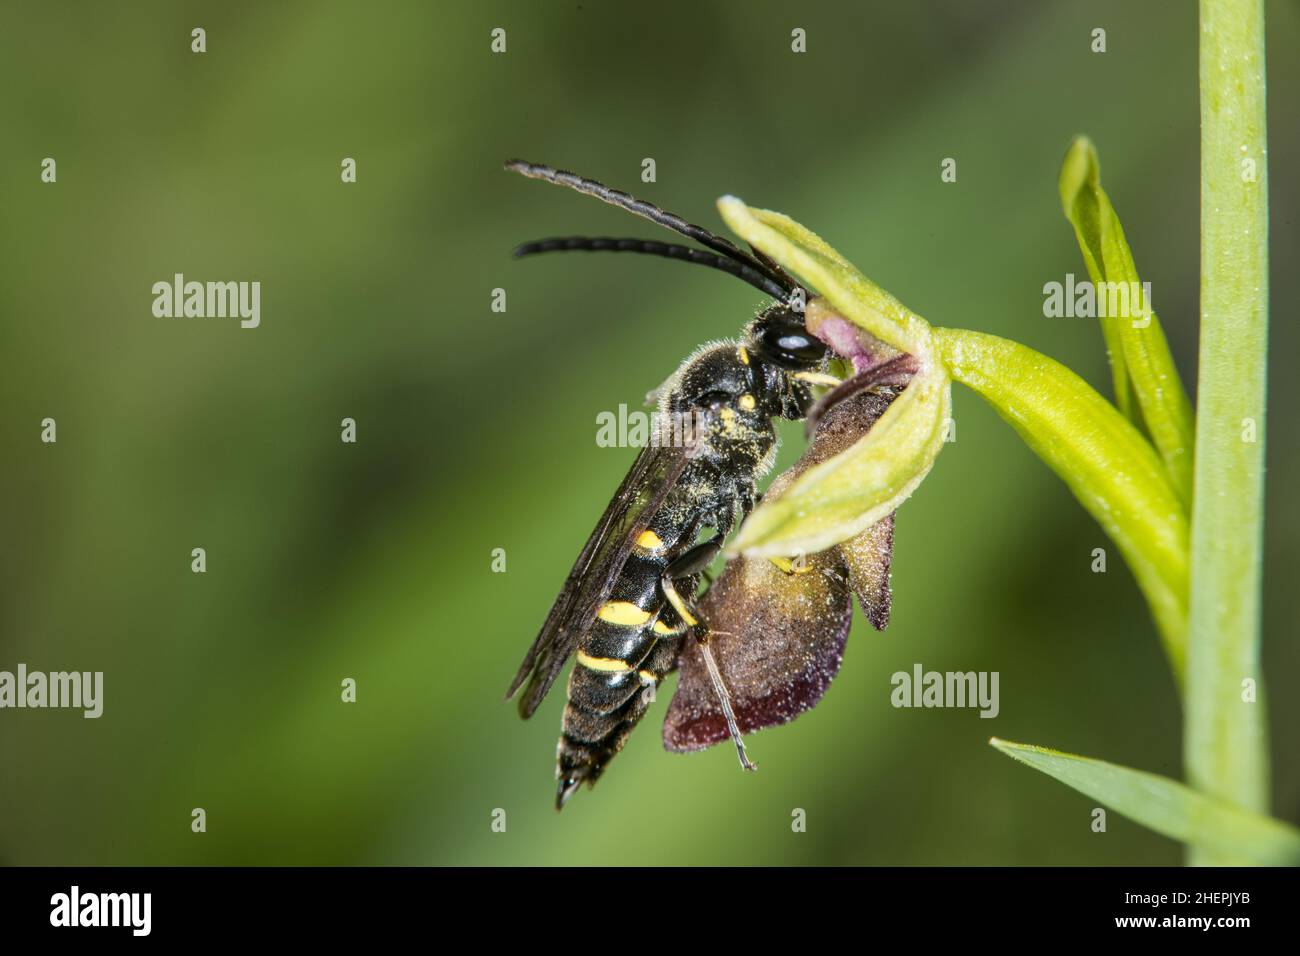 solitary wasp (Argogorytes mystaceus), on an Ophrys flower, Germany Stock Photo